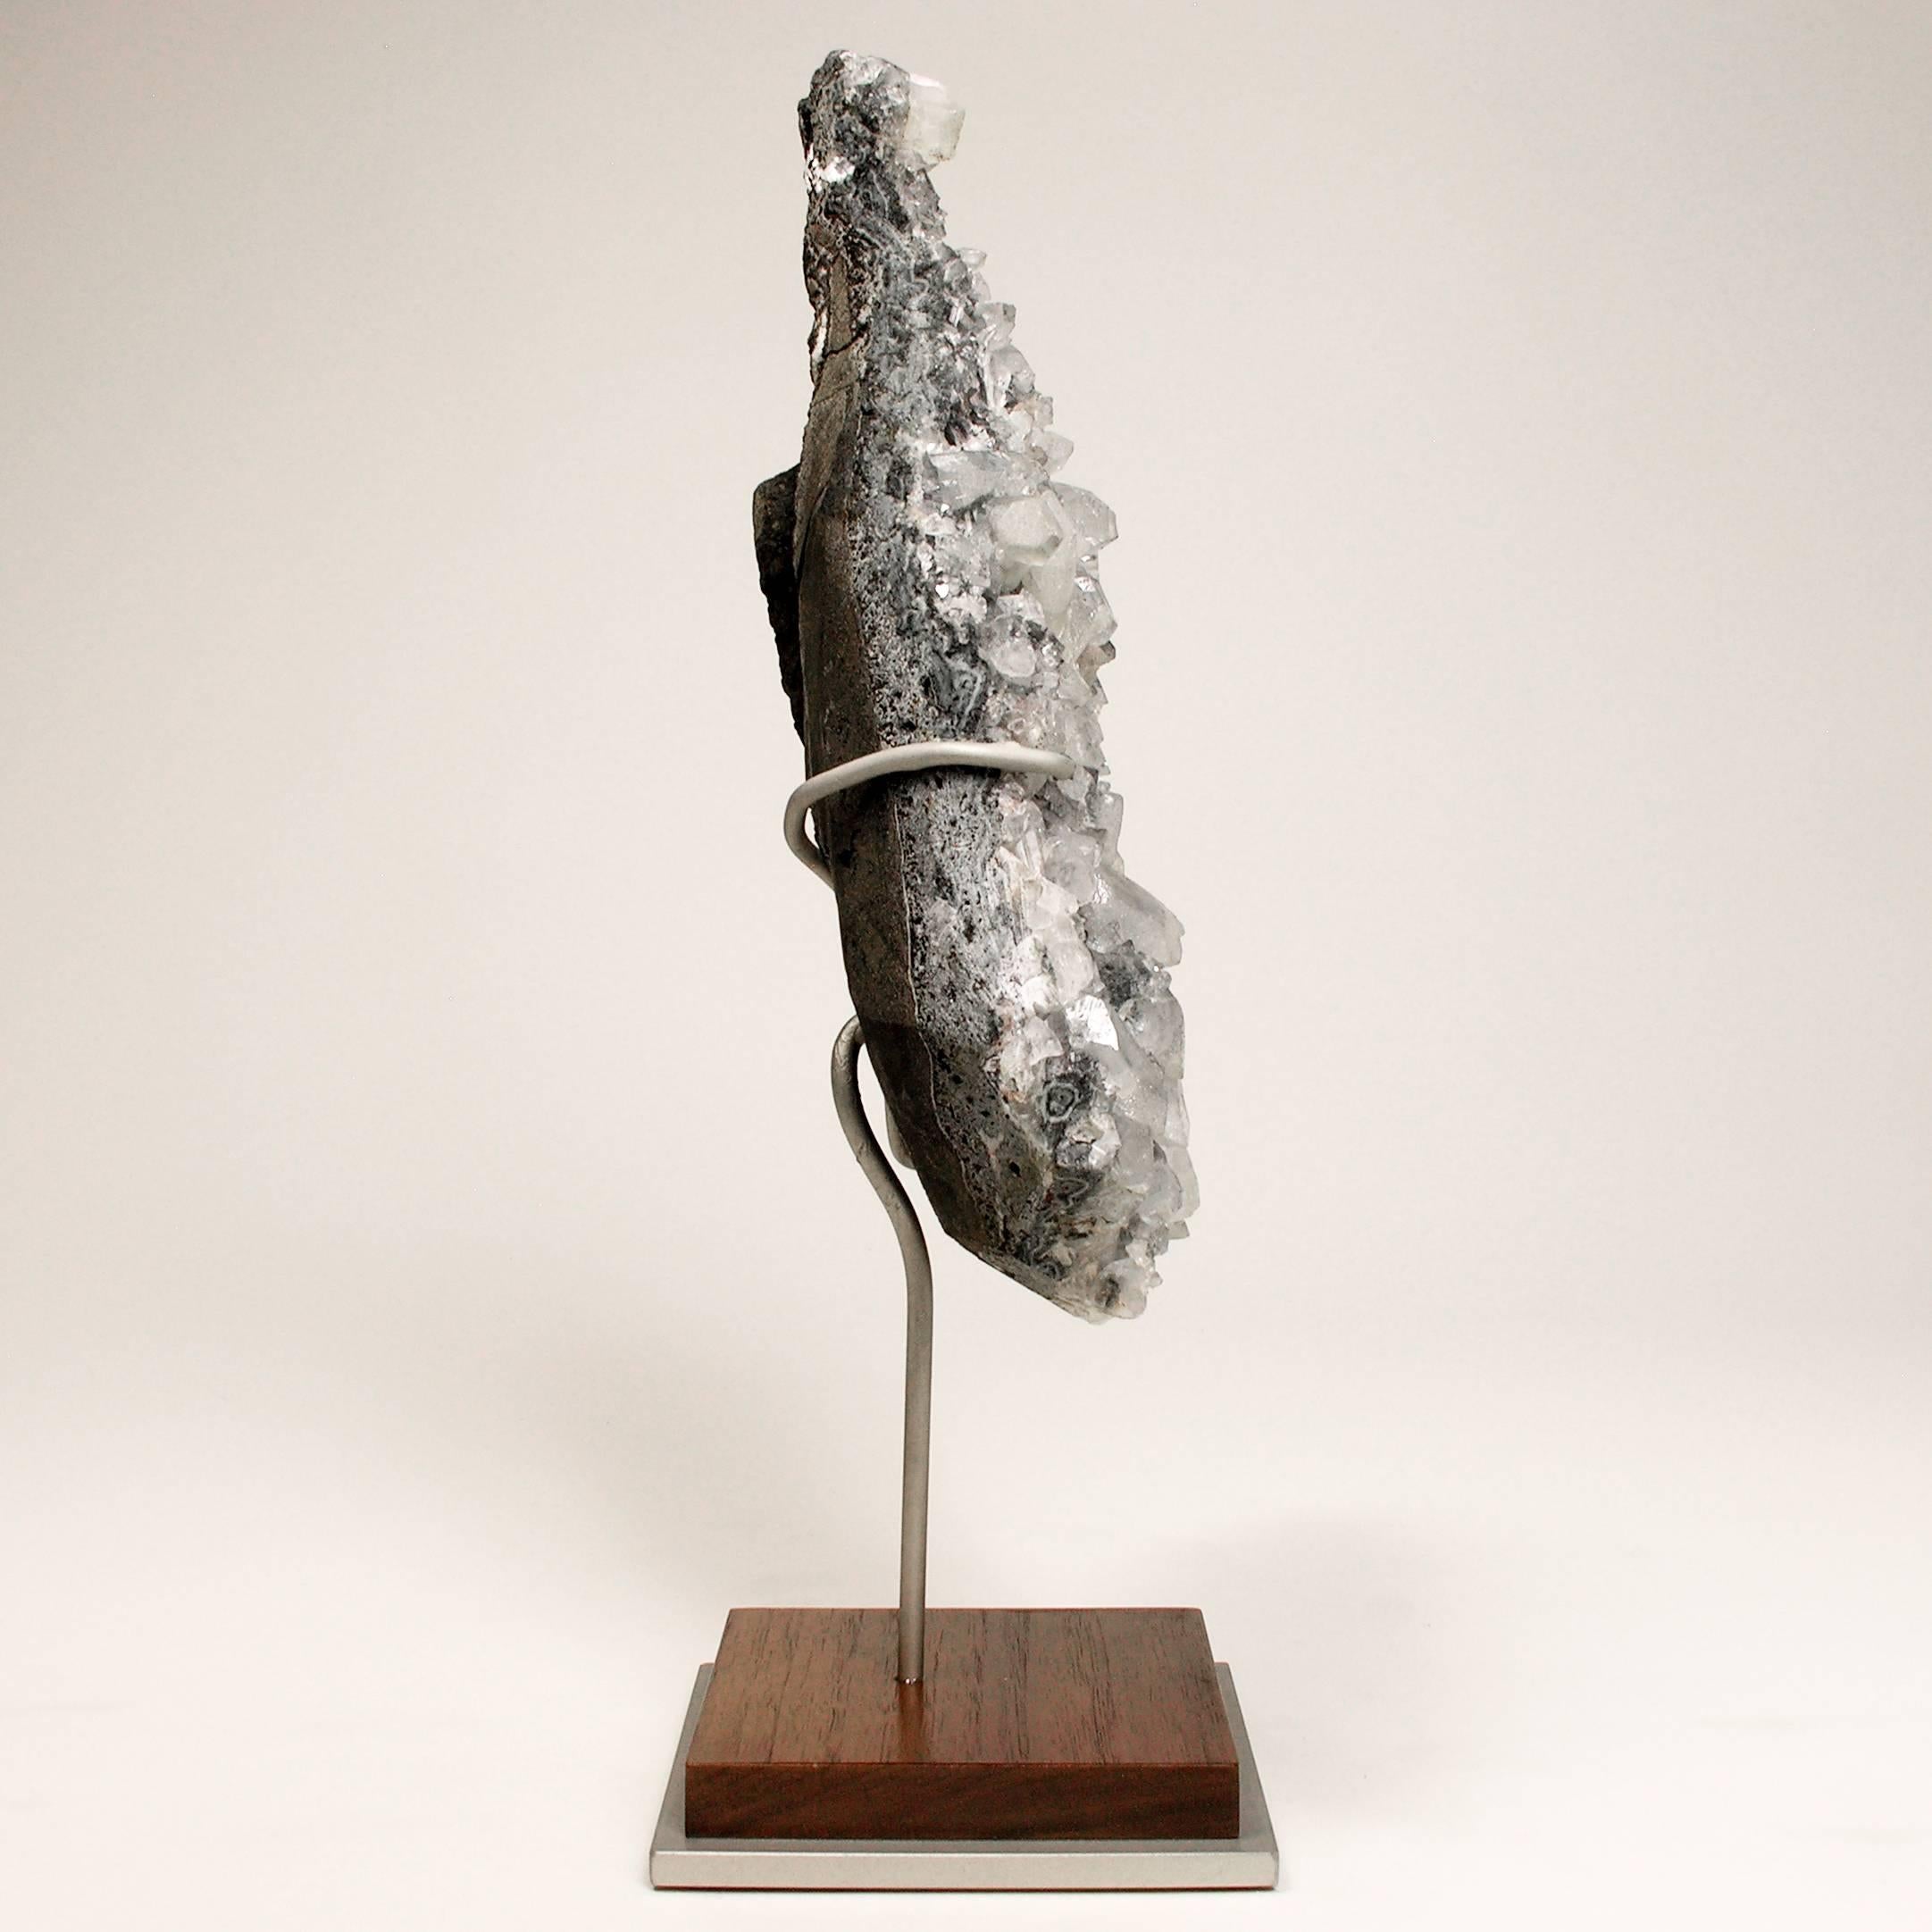 18th Century and Earlier Mineral Specimen Sculpture Apophyllite Grown on a Crystal Base